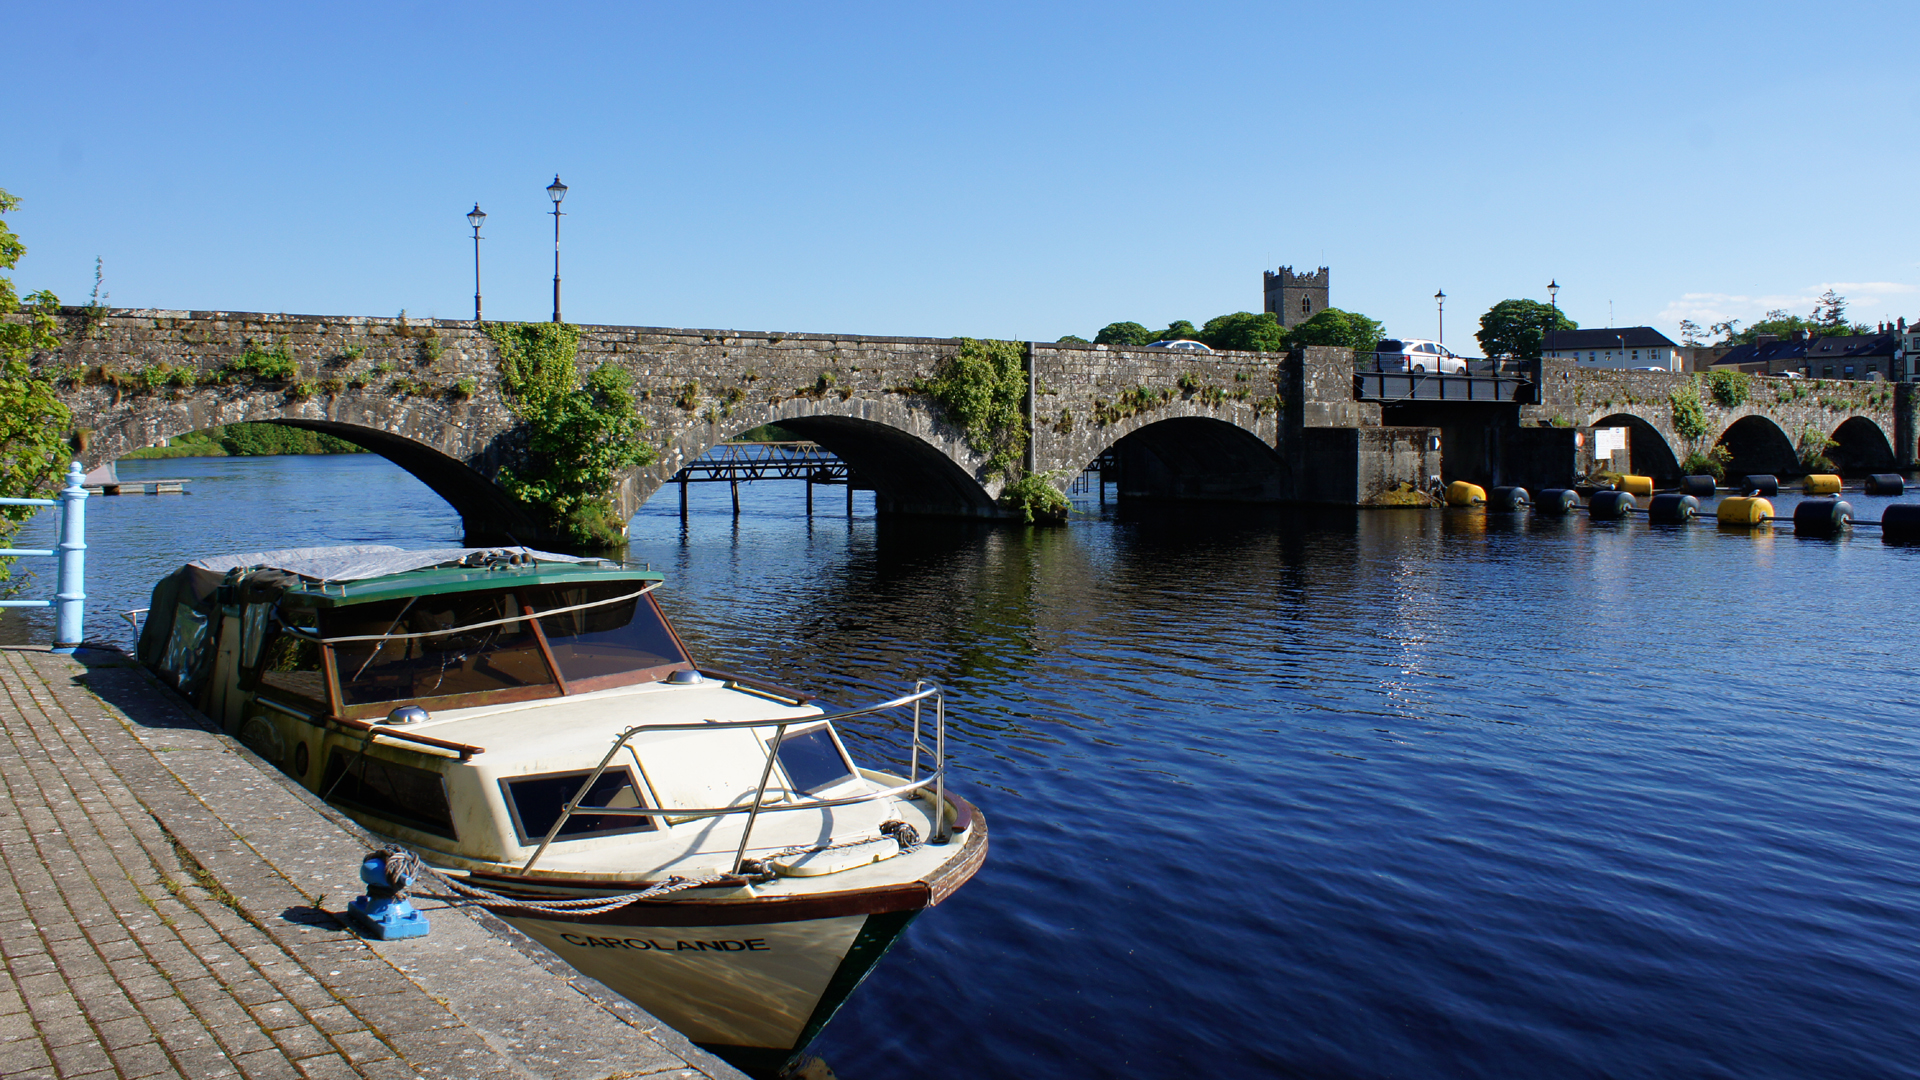 Irland 06: River Shannon